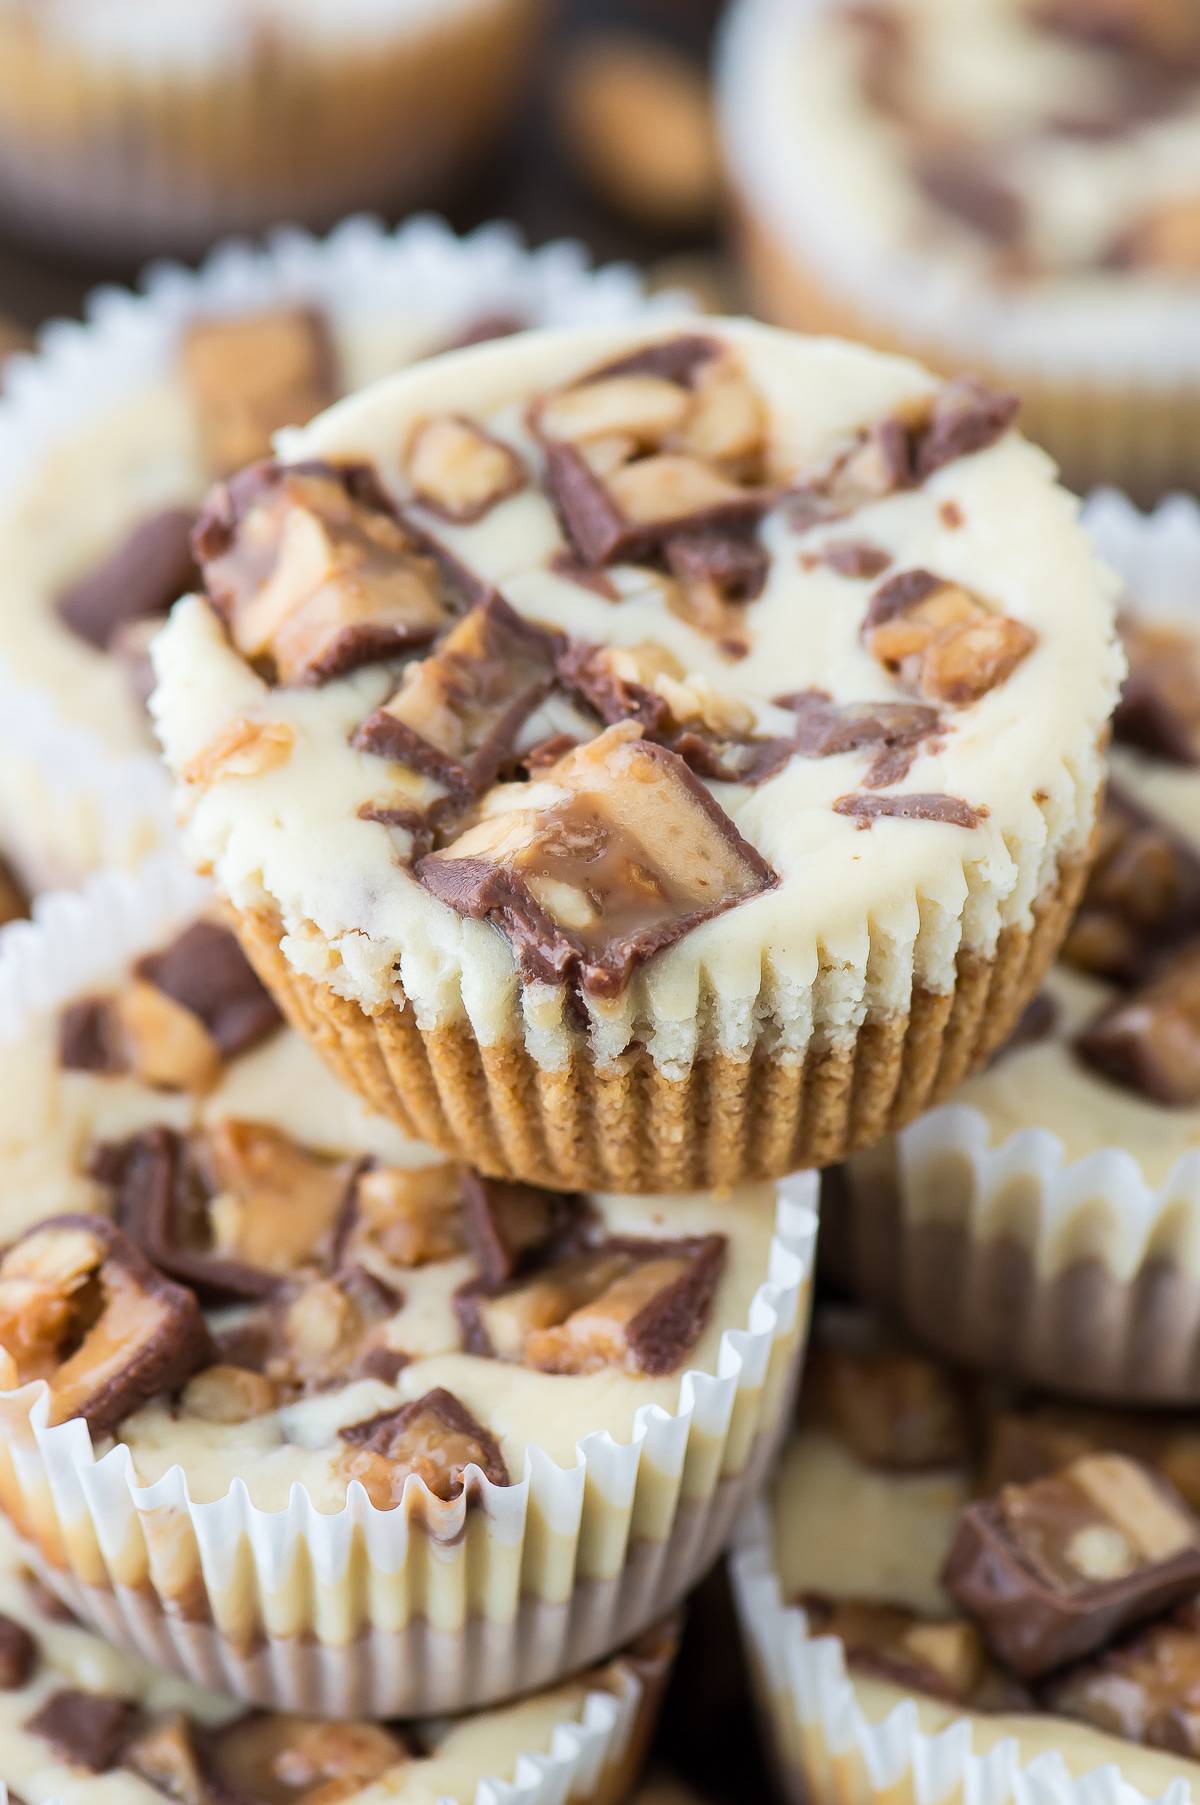 7 ingredient mini snicker’s cheesecake recipe made in a muffin pan!